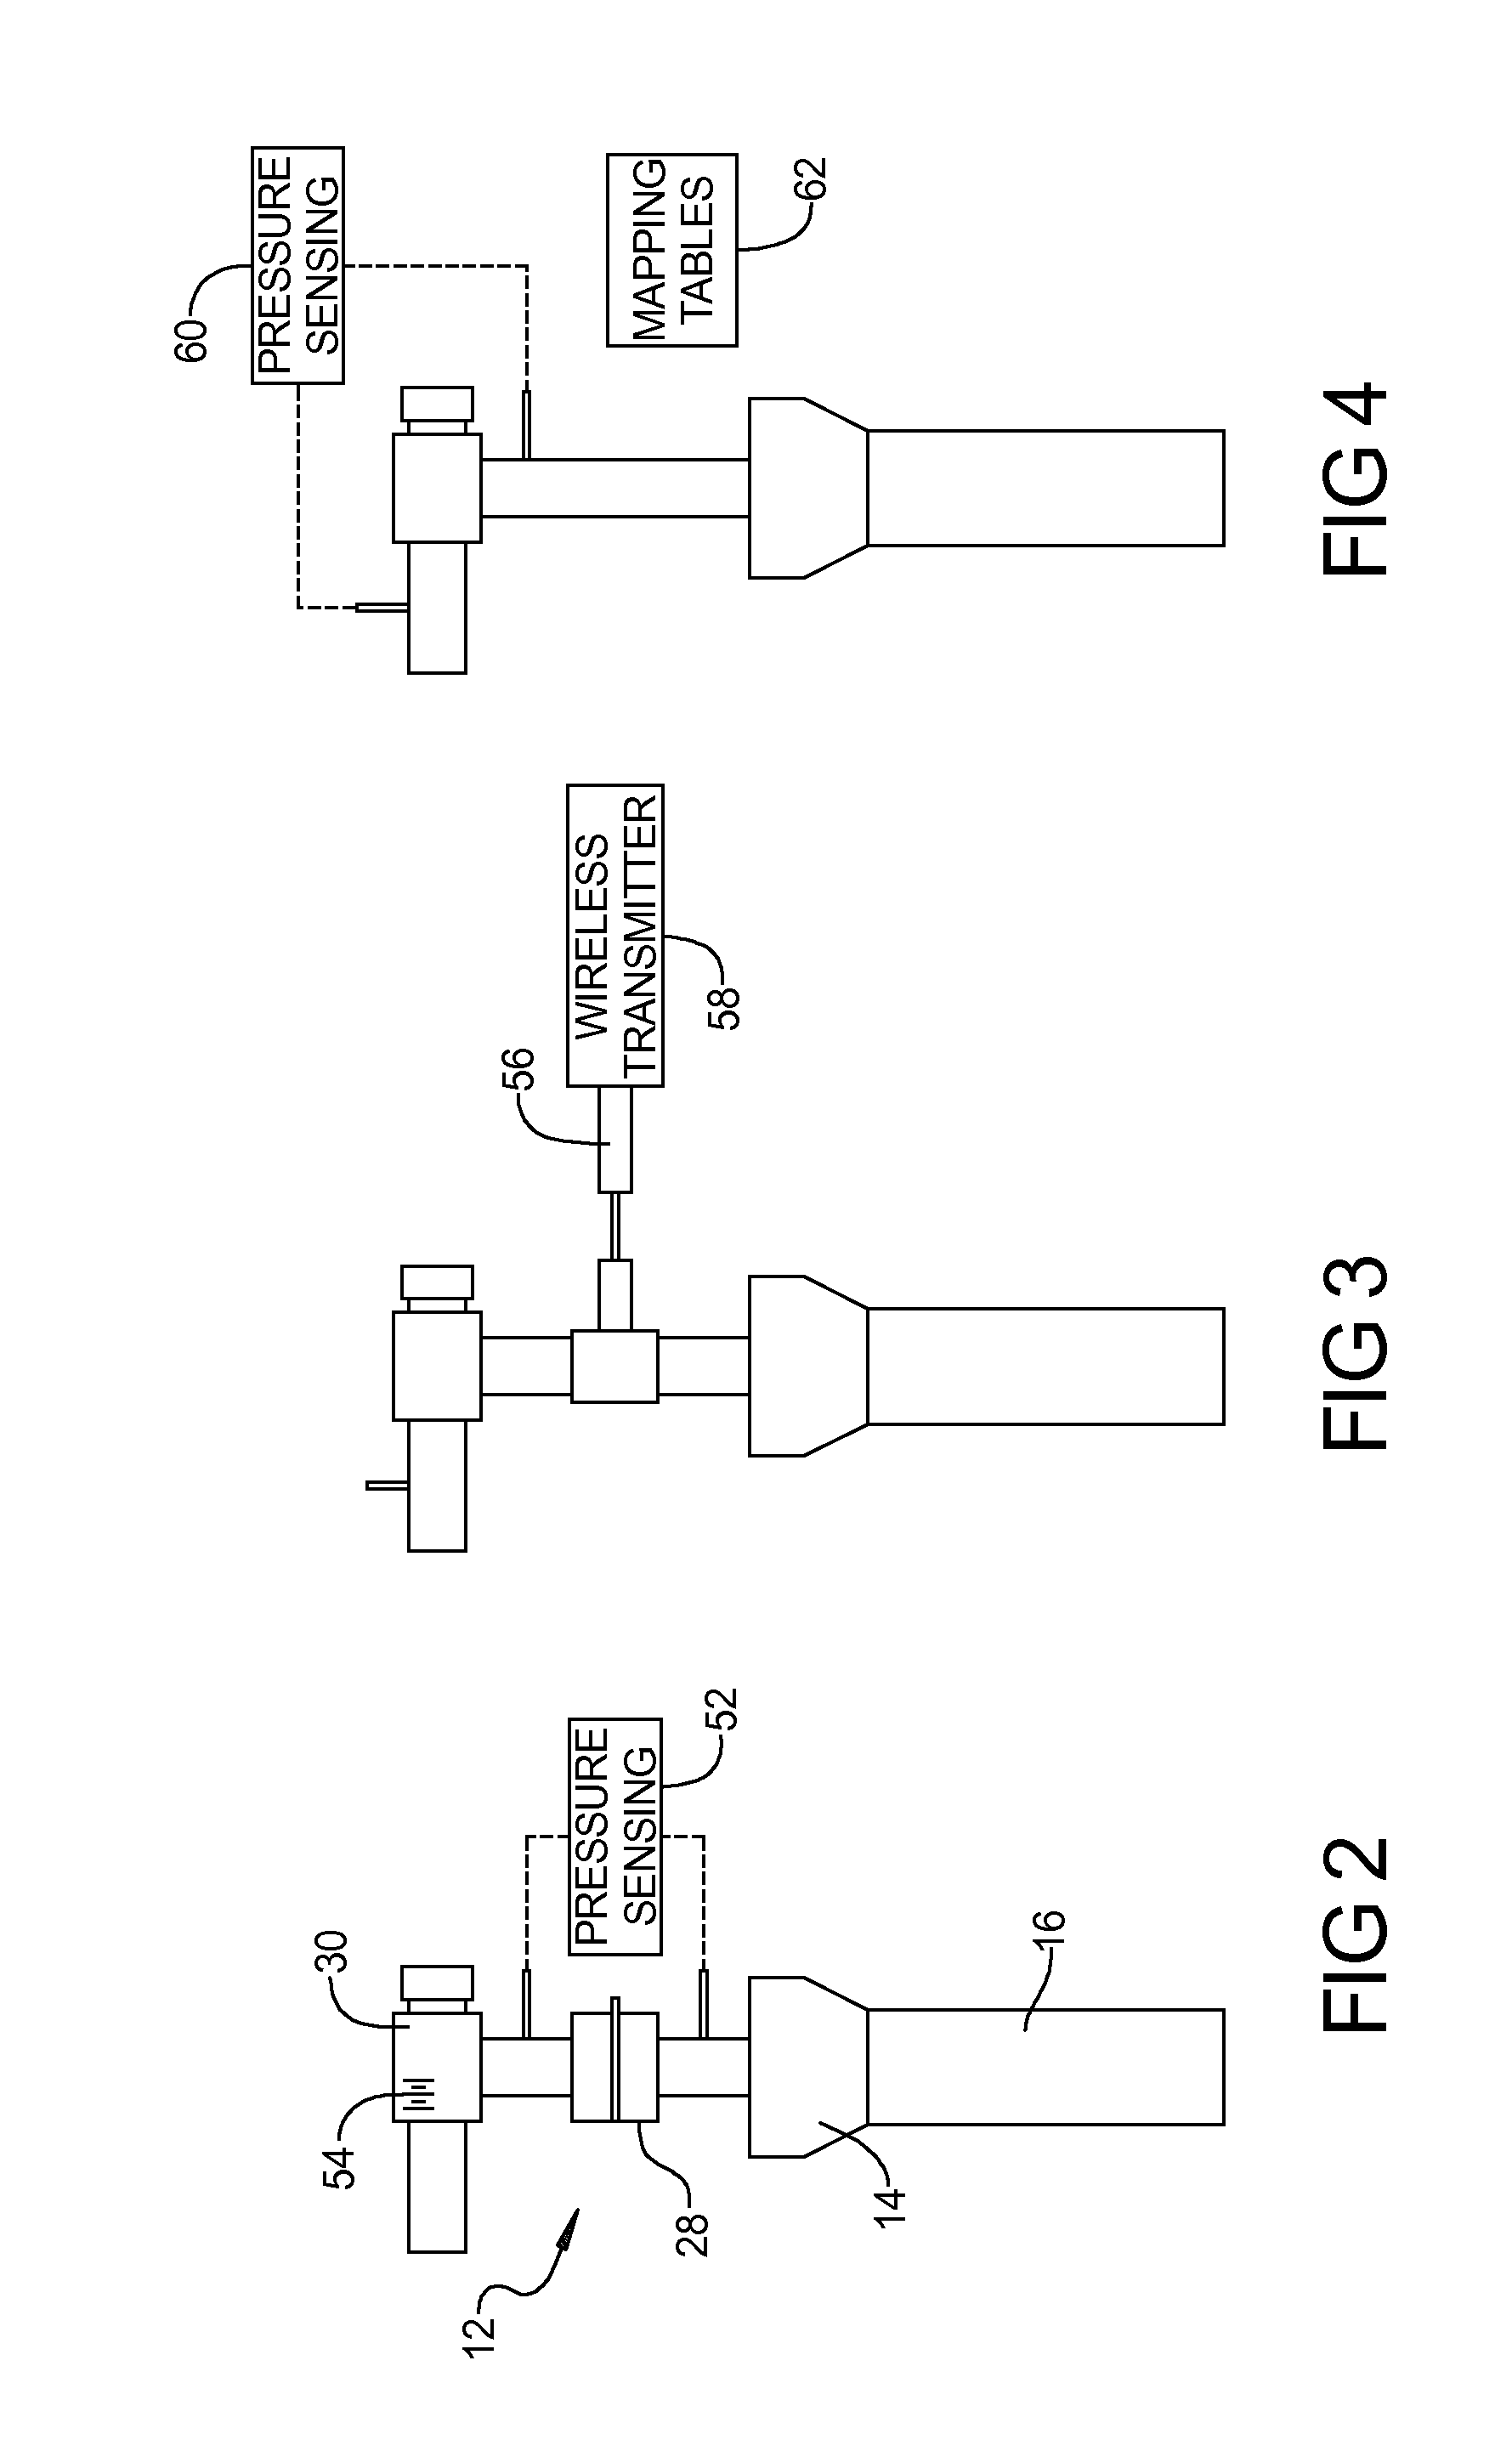 Devices And Methods For Landfill Gas Well Monitoring And Control